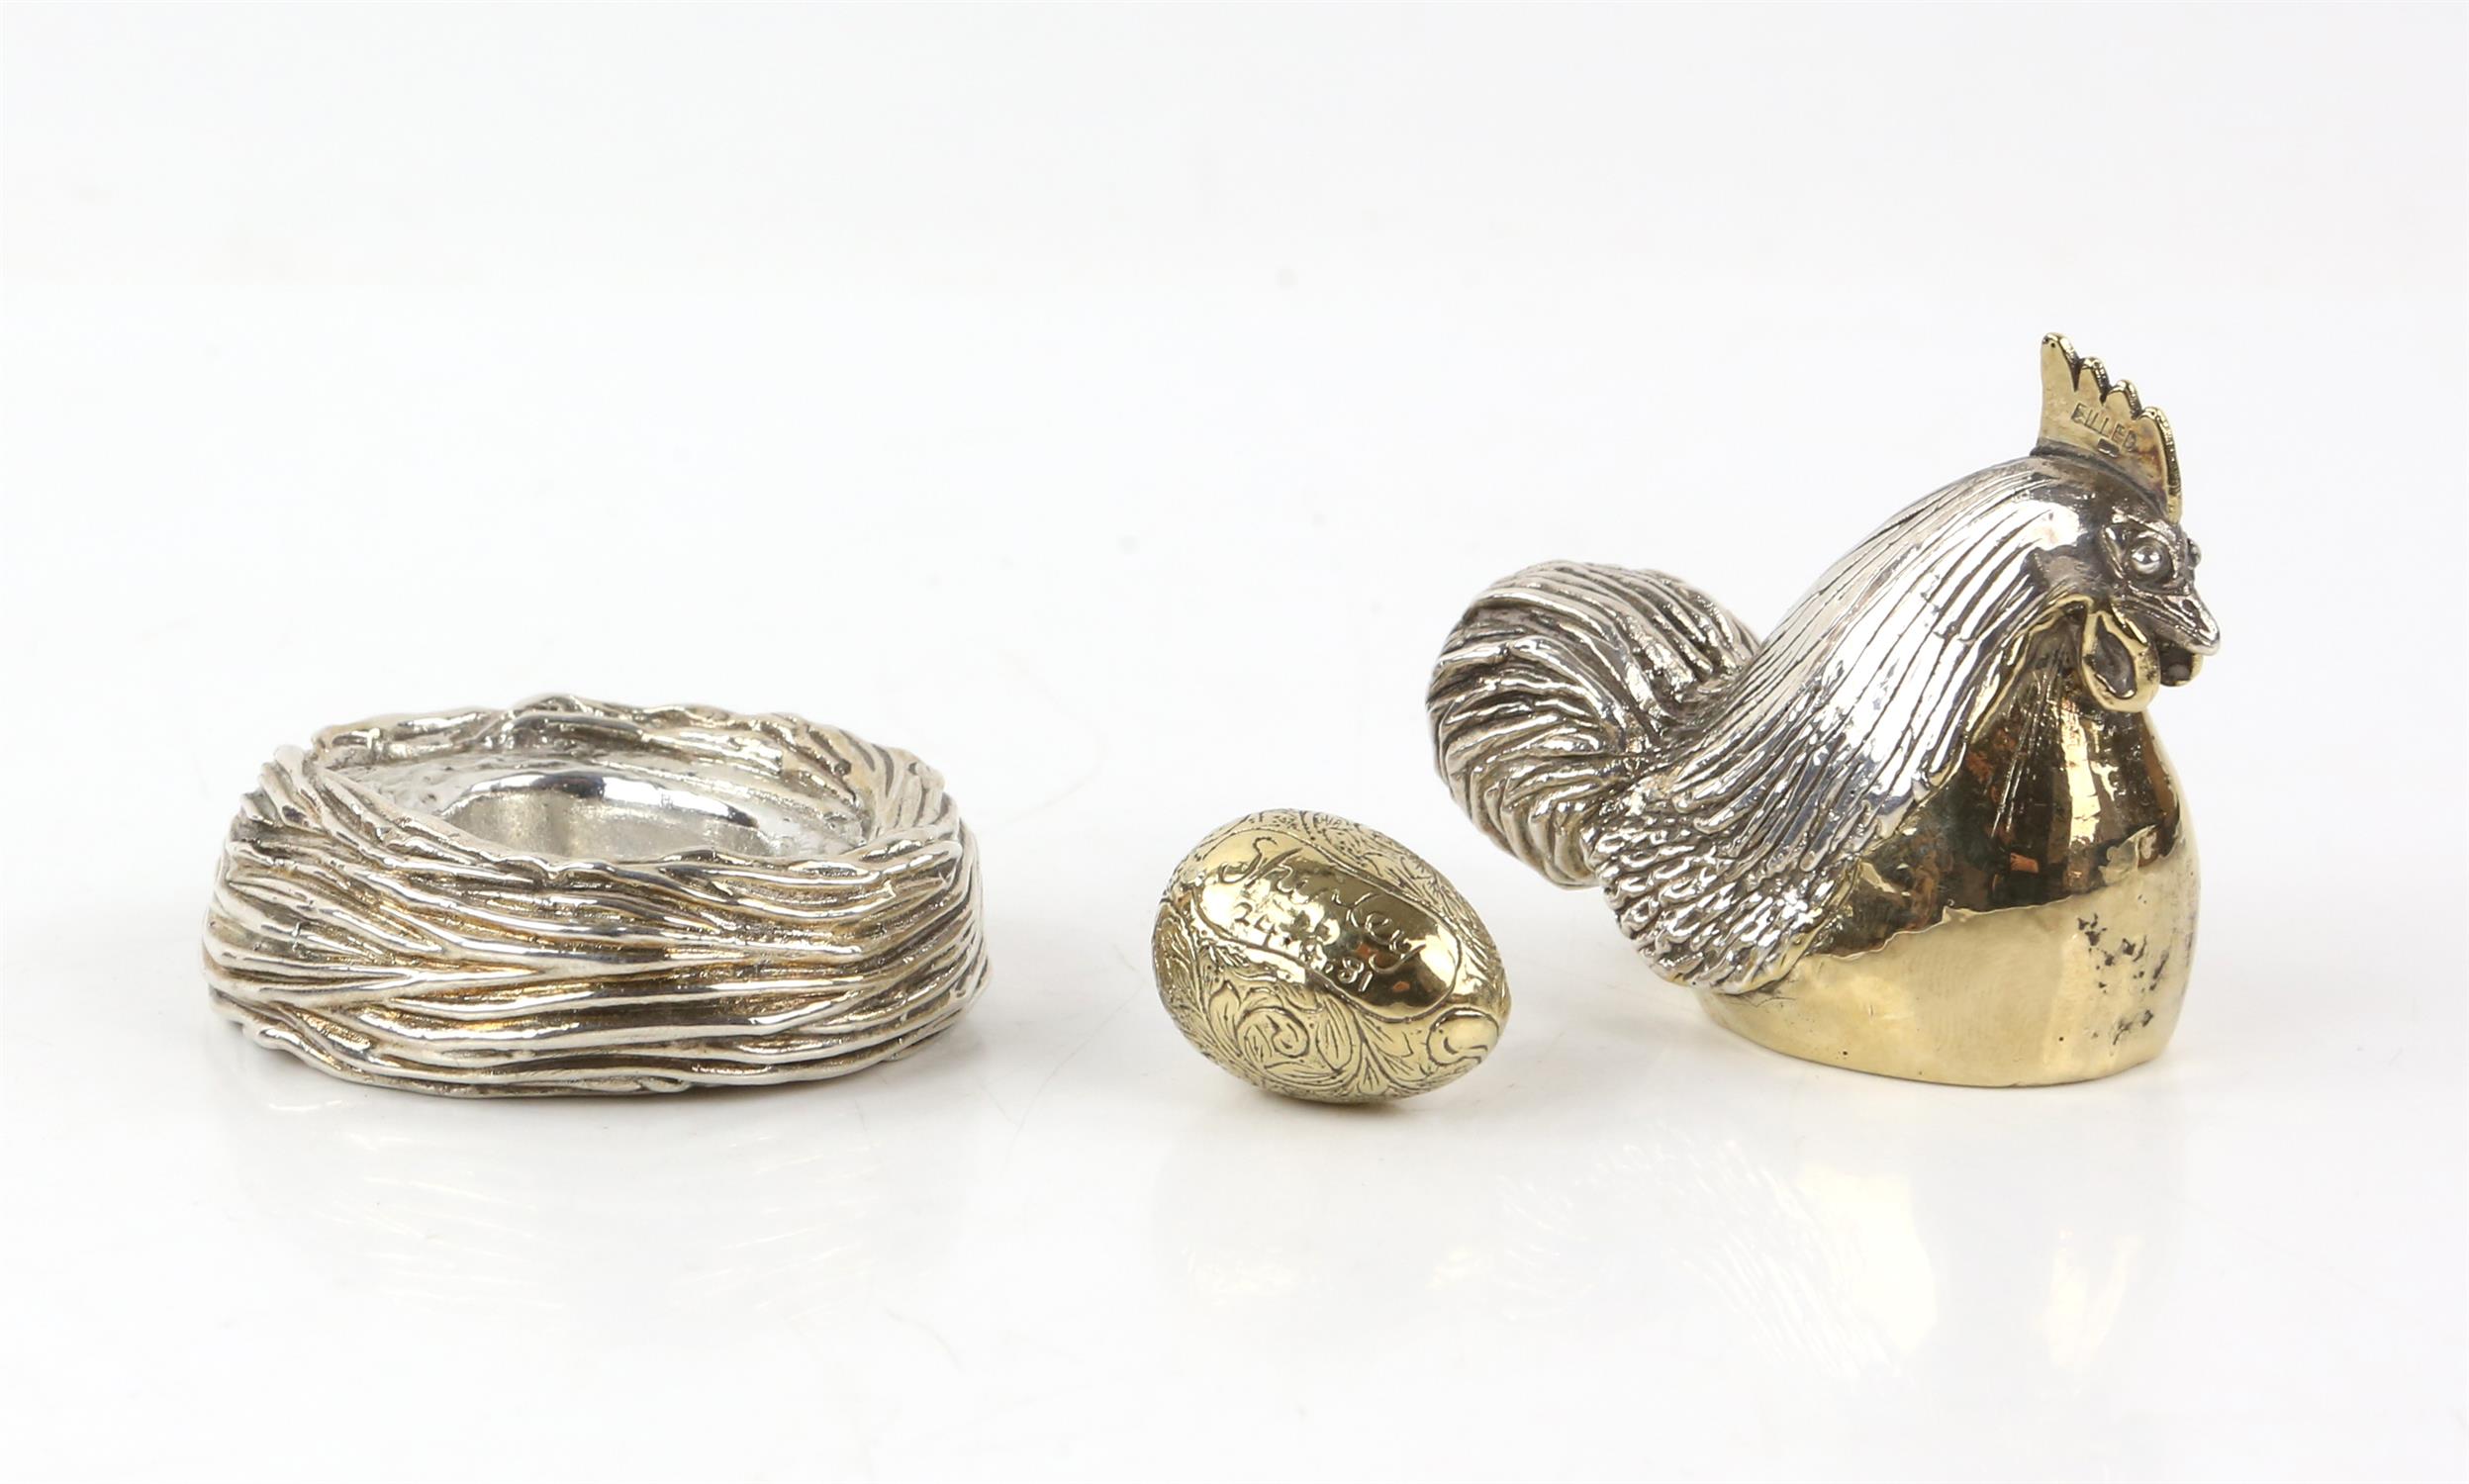 Three piece model of a filled silver chicken with gilt decoration on an egg within a nest by A Ltd, - Image 3 of 5